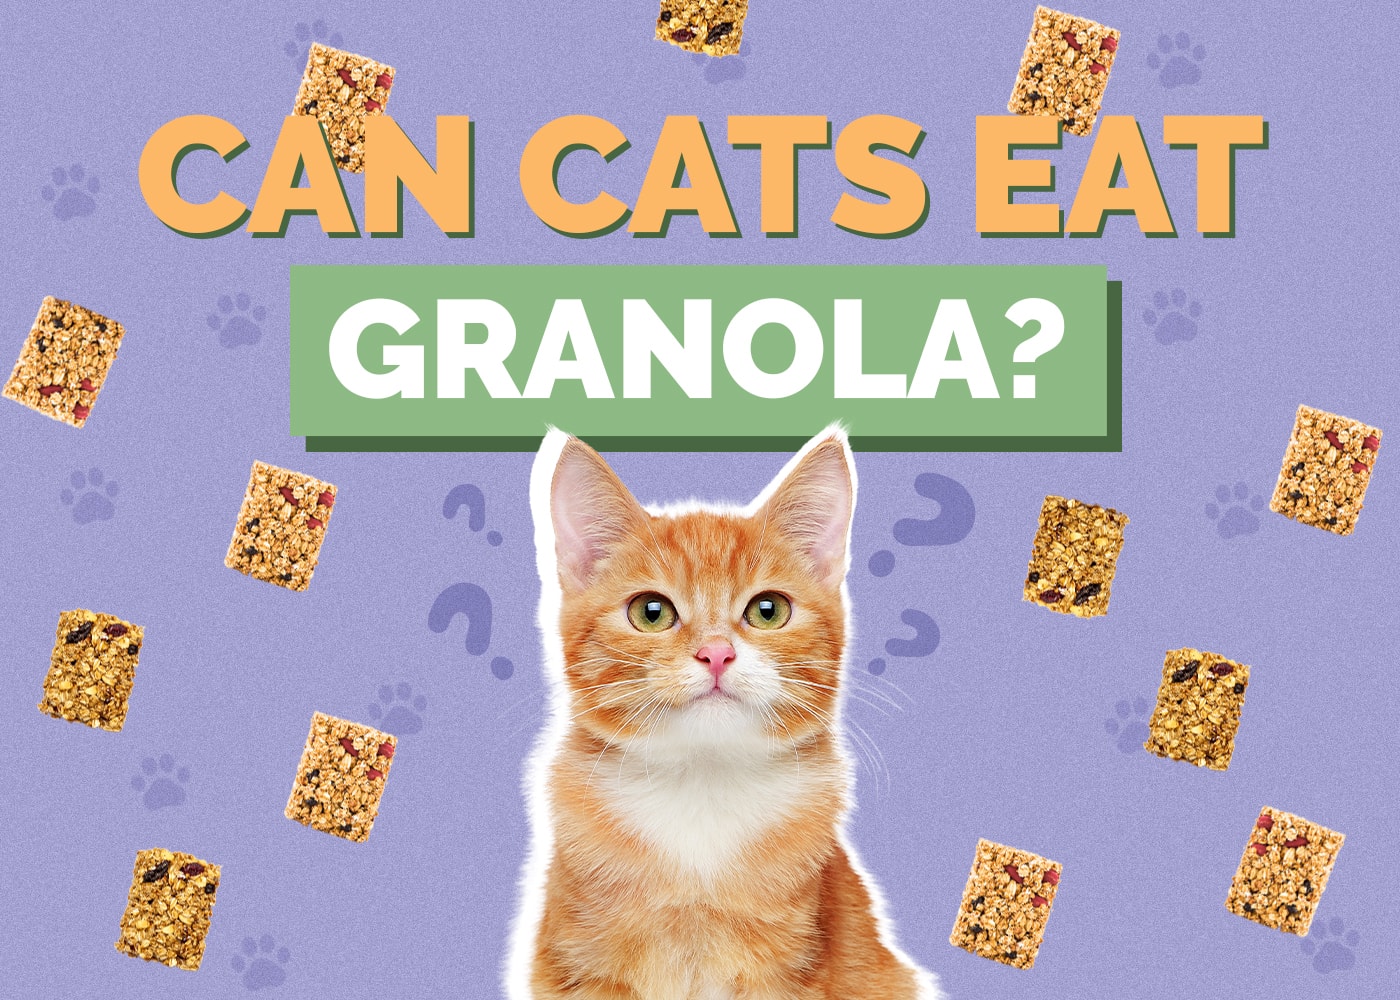 Can Cats Eat granola